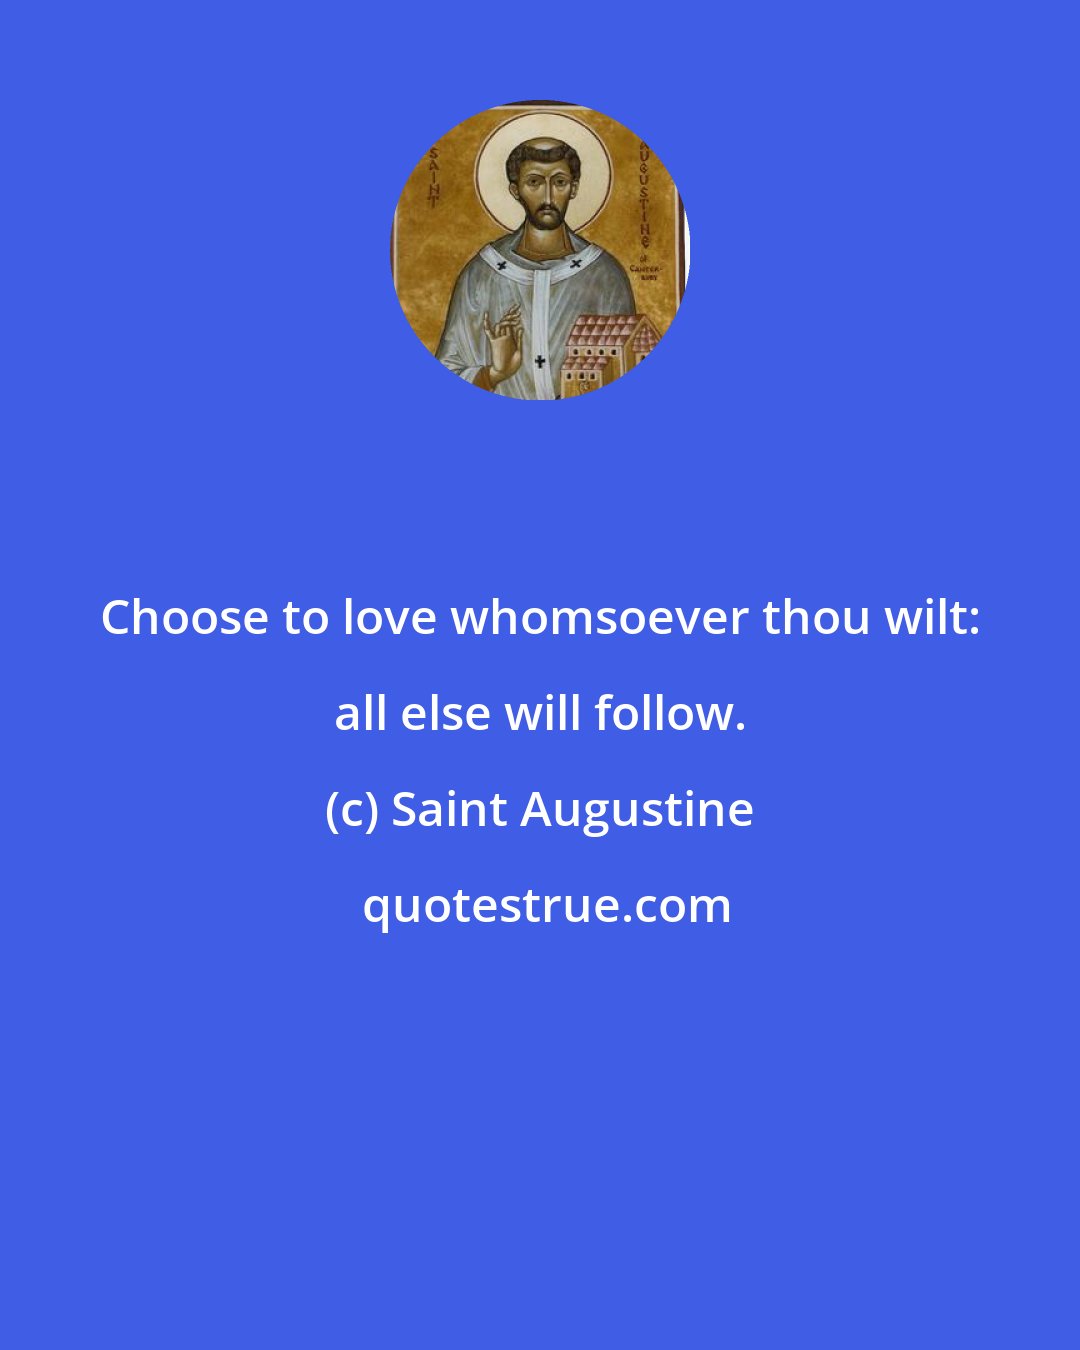 Saint Augustine: Choose to love whomsoever thou wilt: all else will follow.